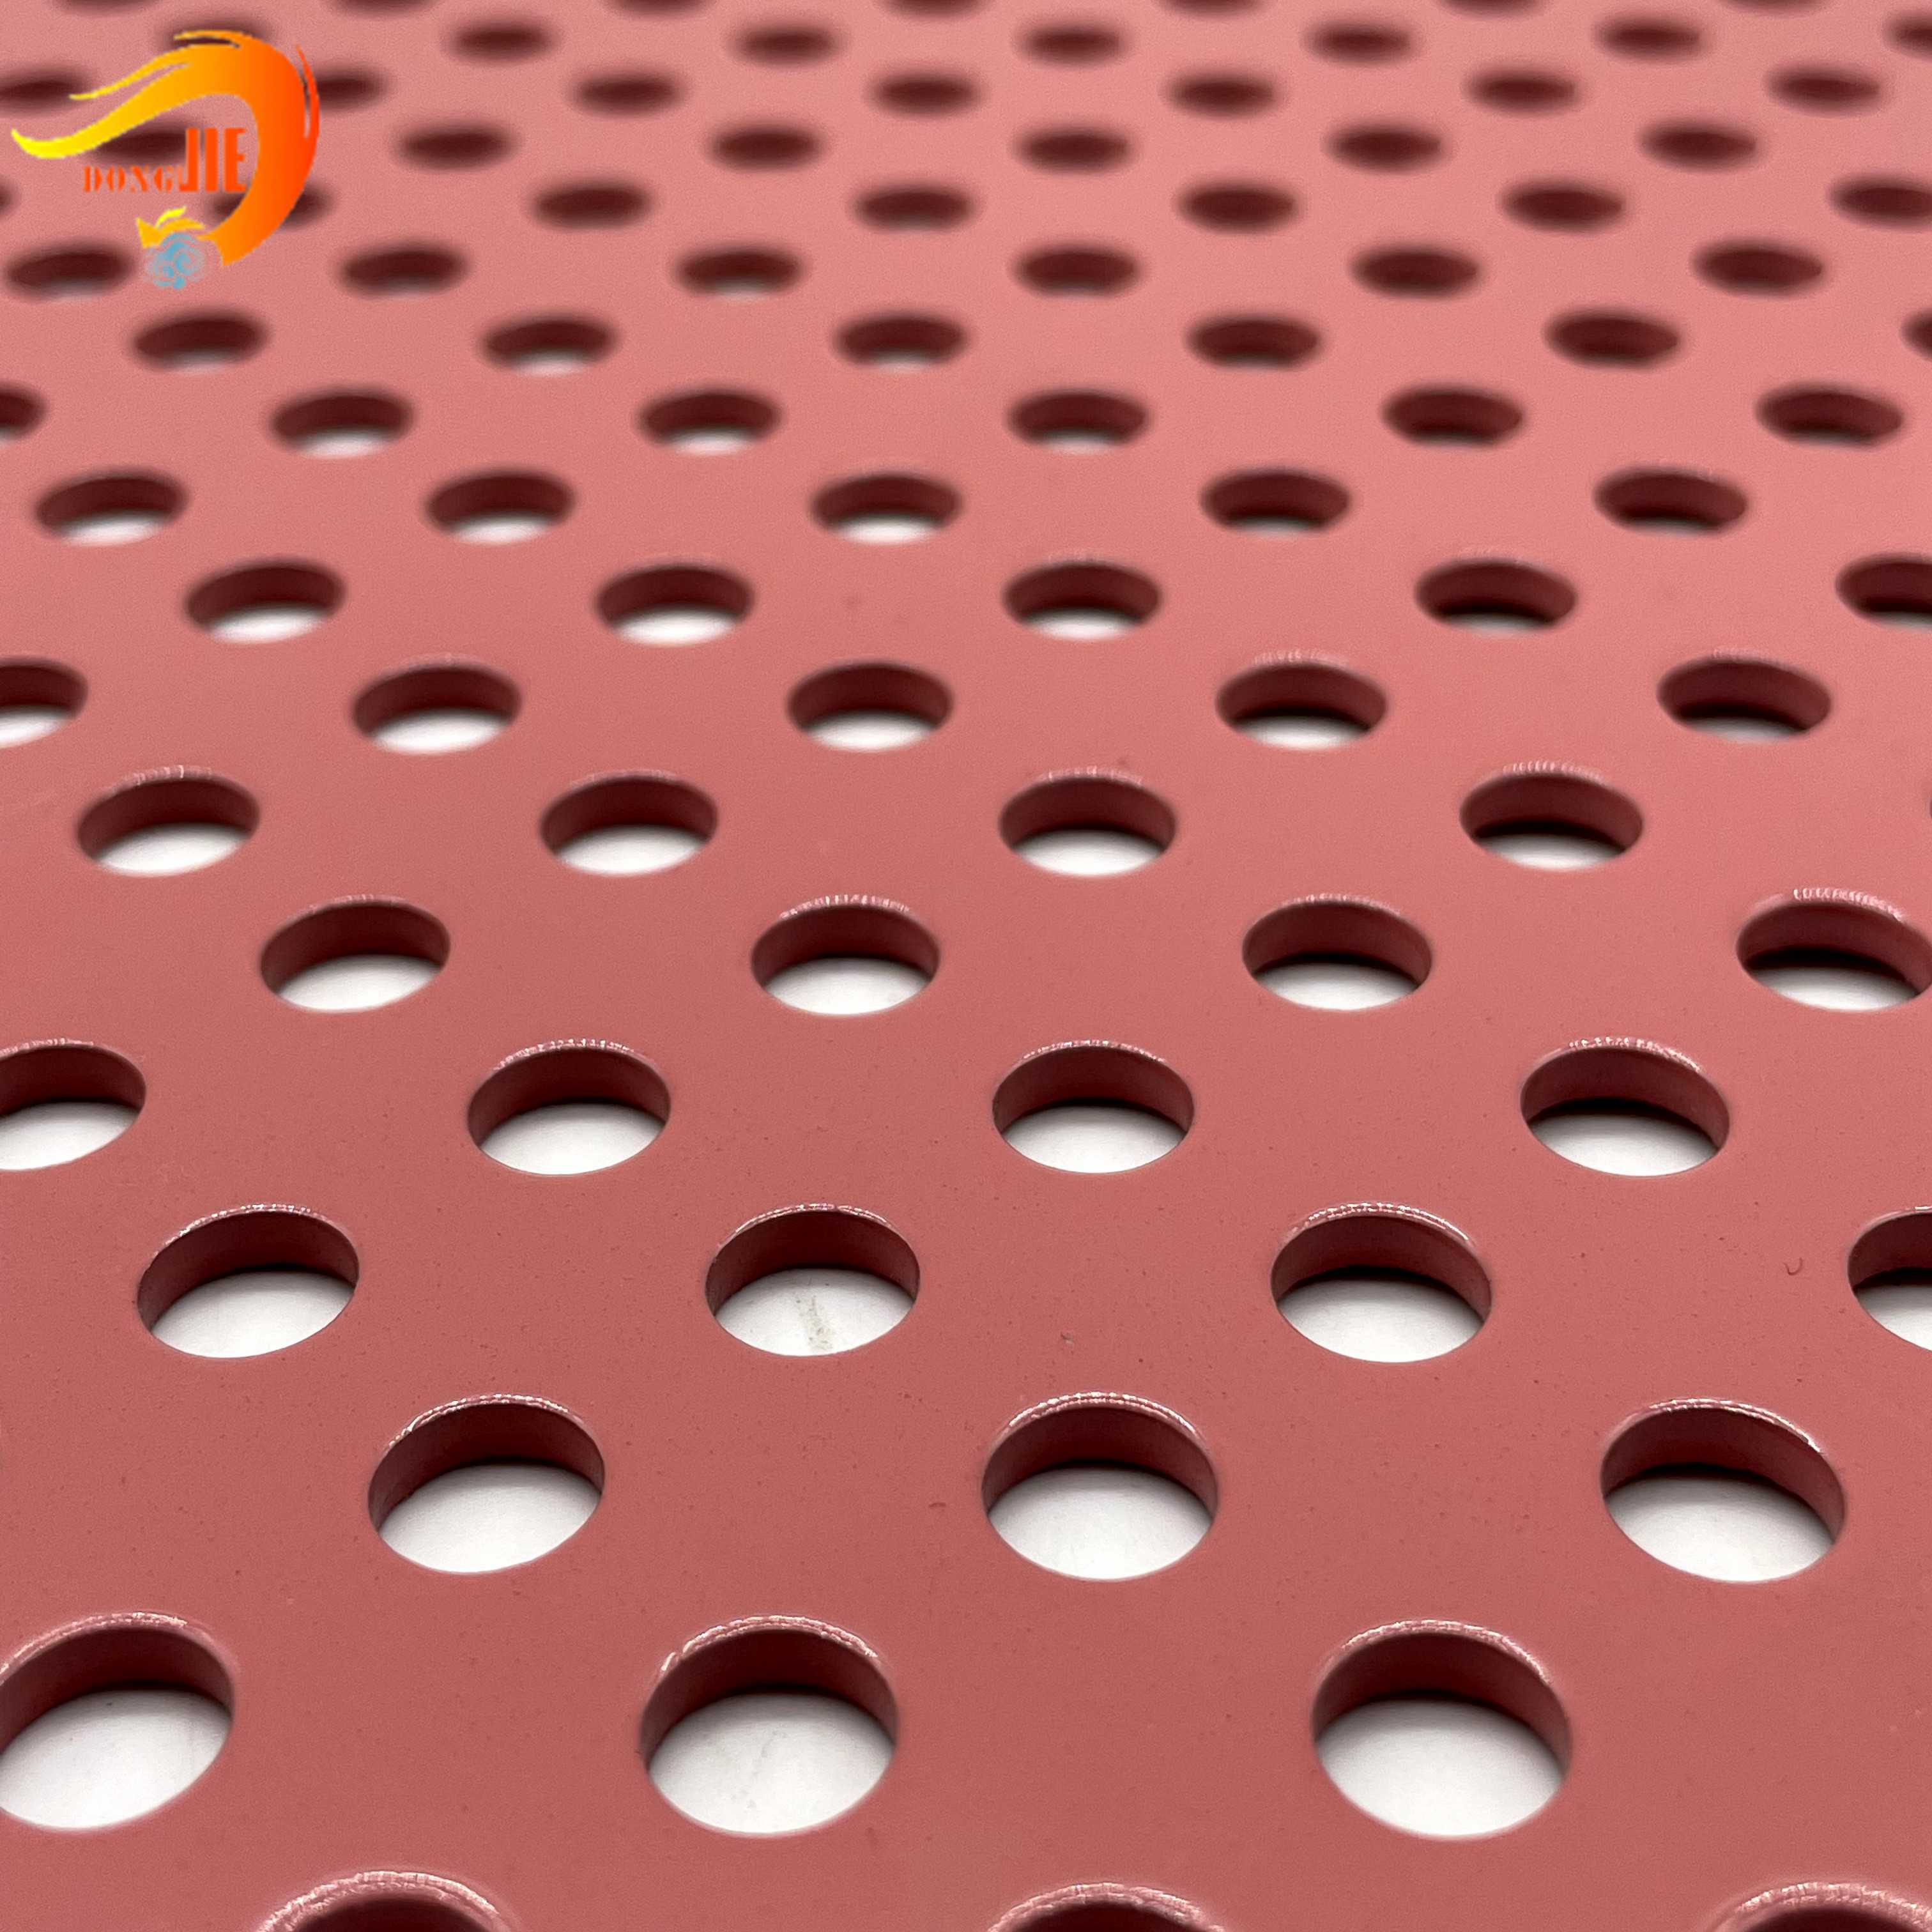 Aluminum Perforated Metal Sheet for Decorative Ceiling tiles Featured Image